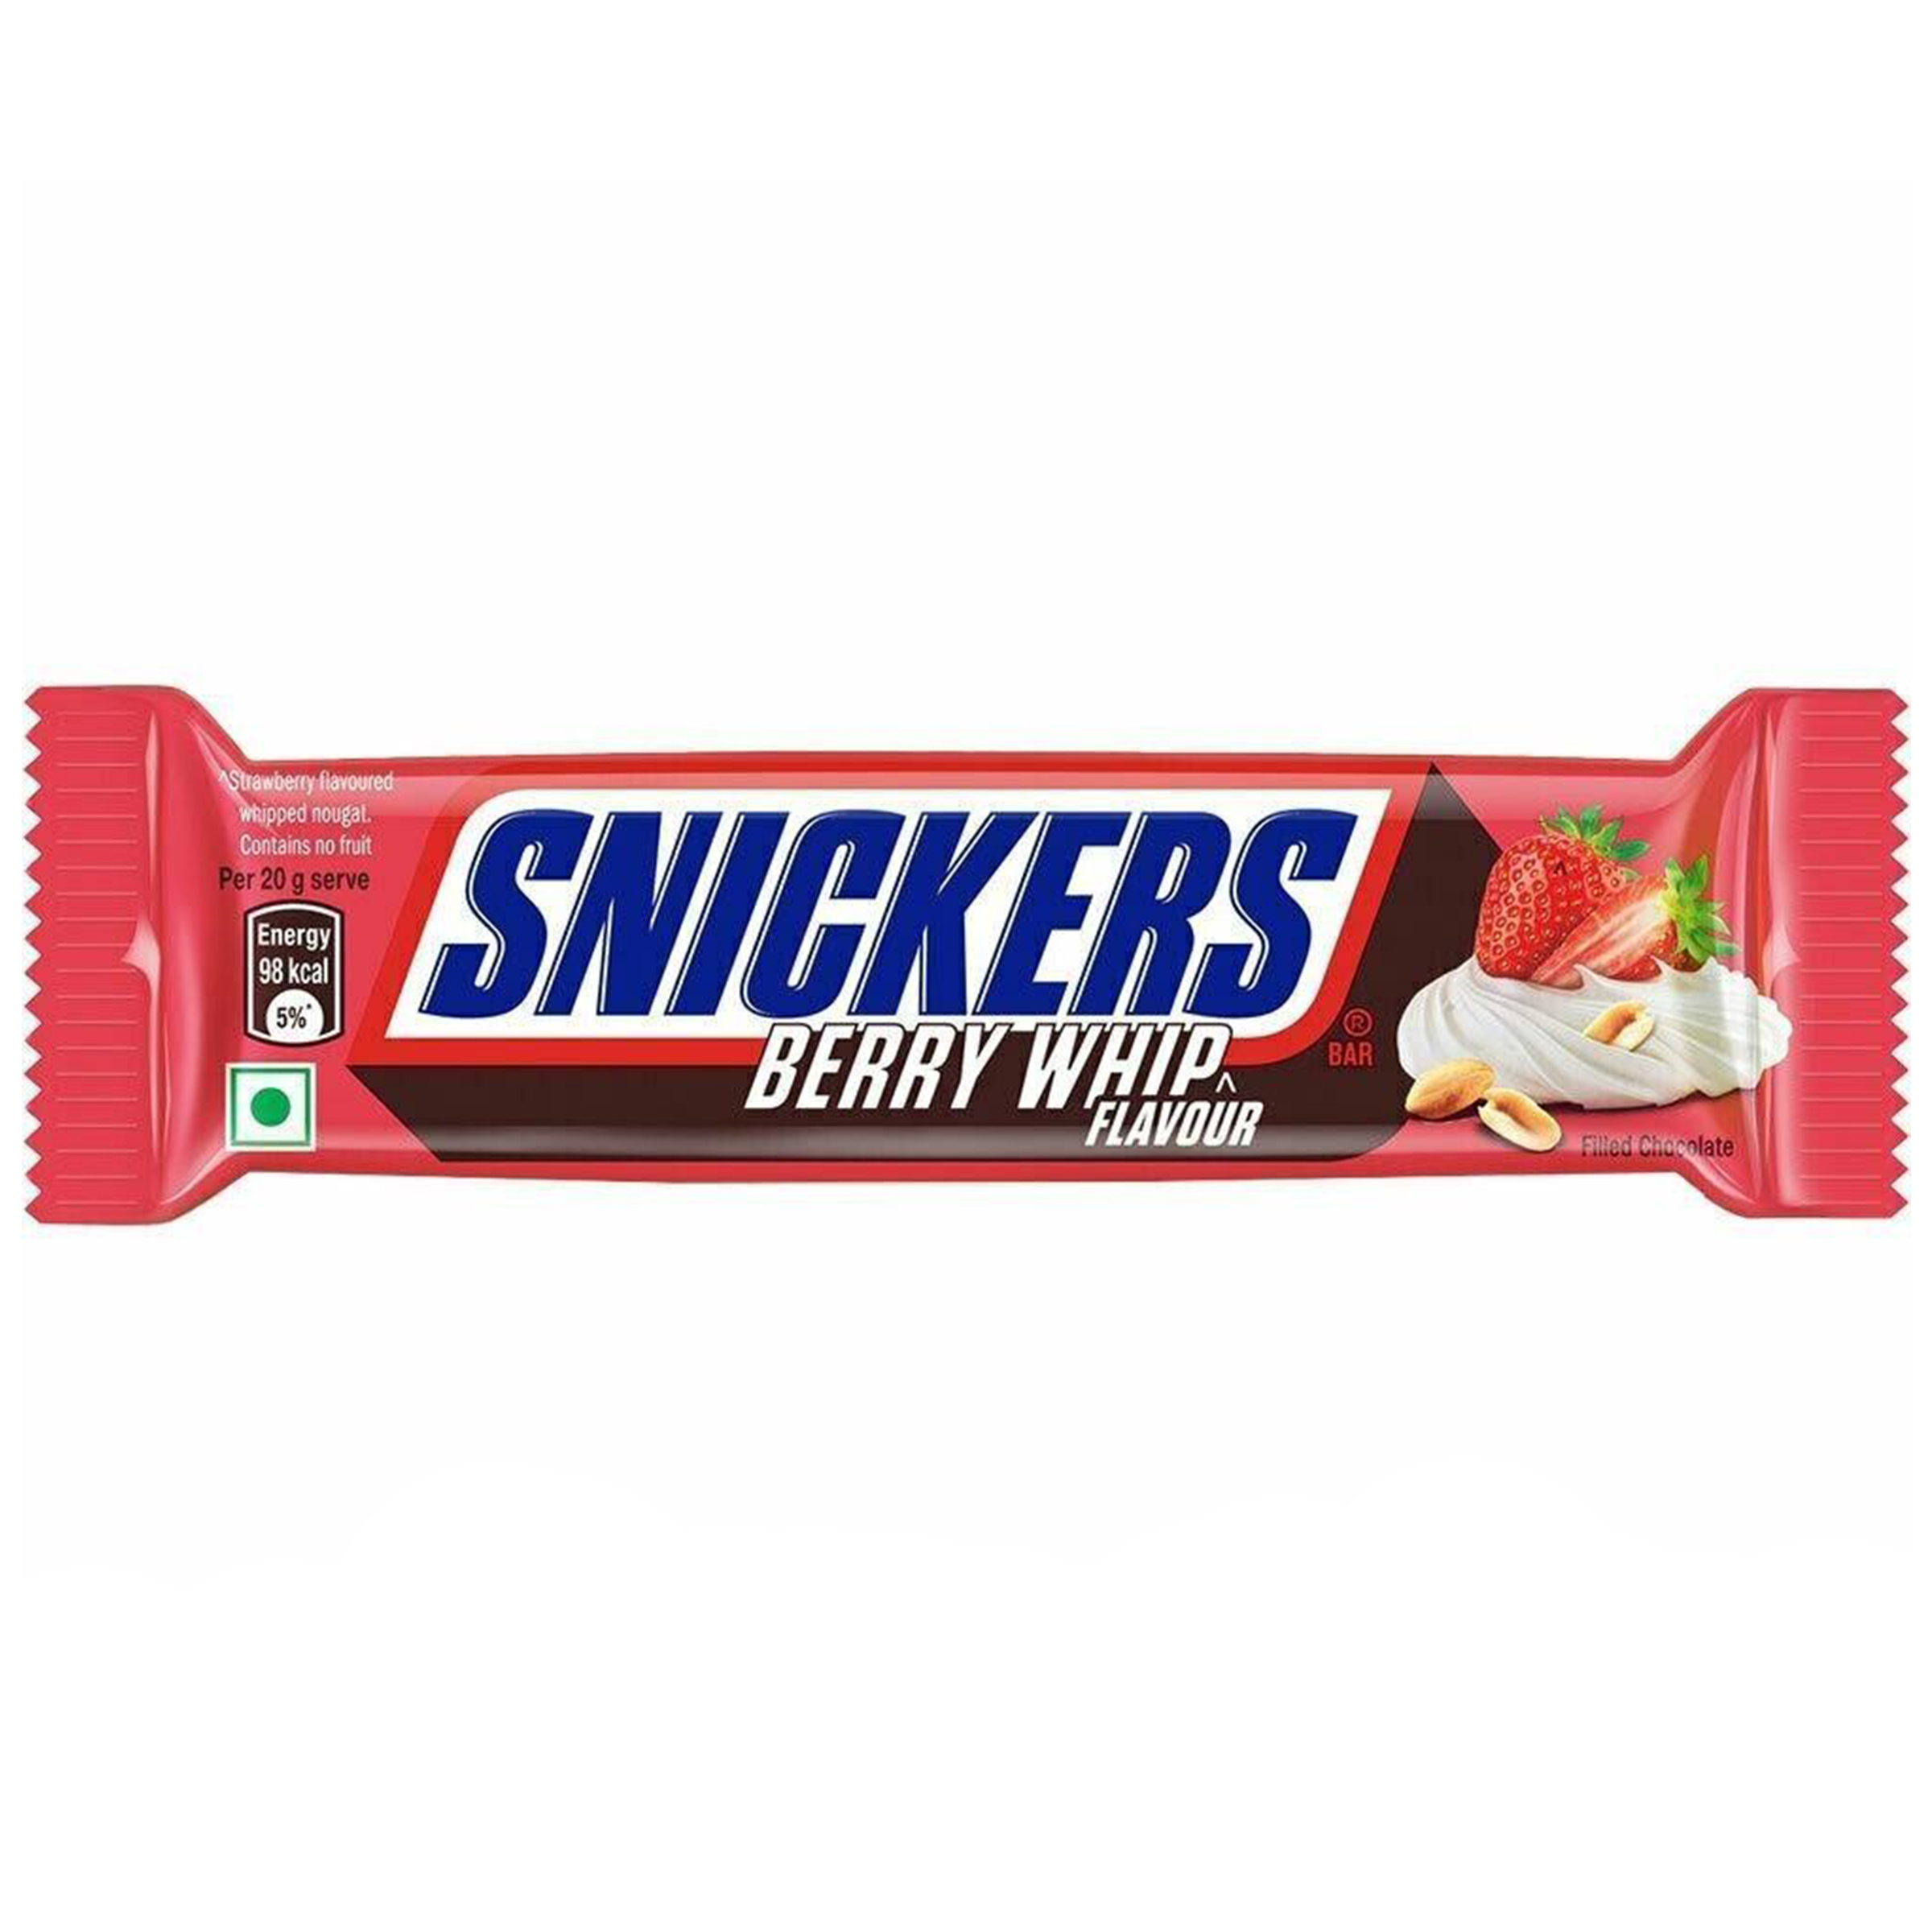 Snickers - Berry Whip (India)